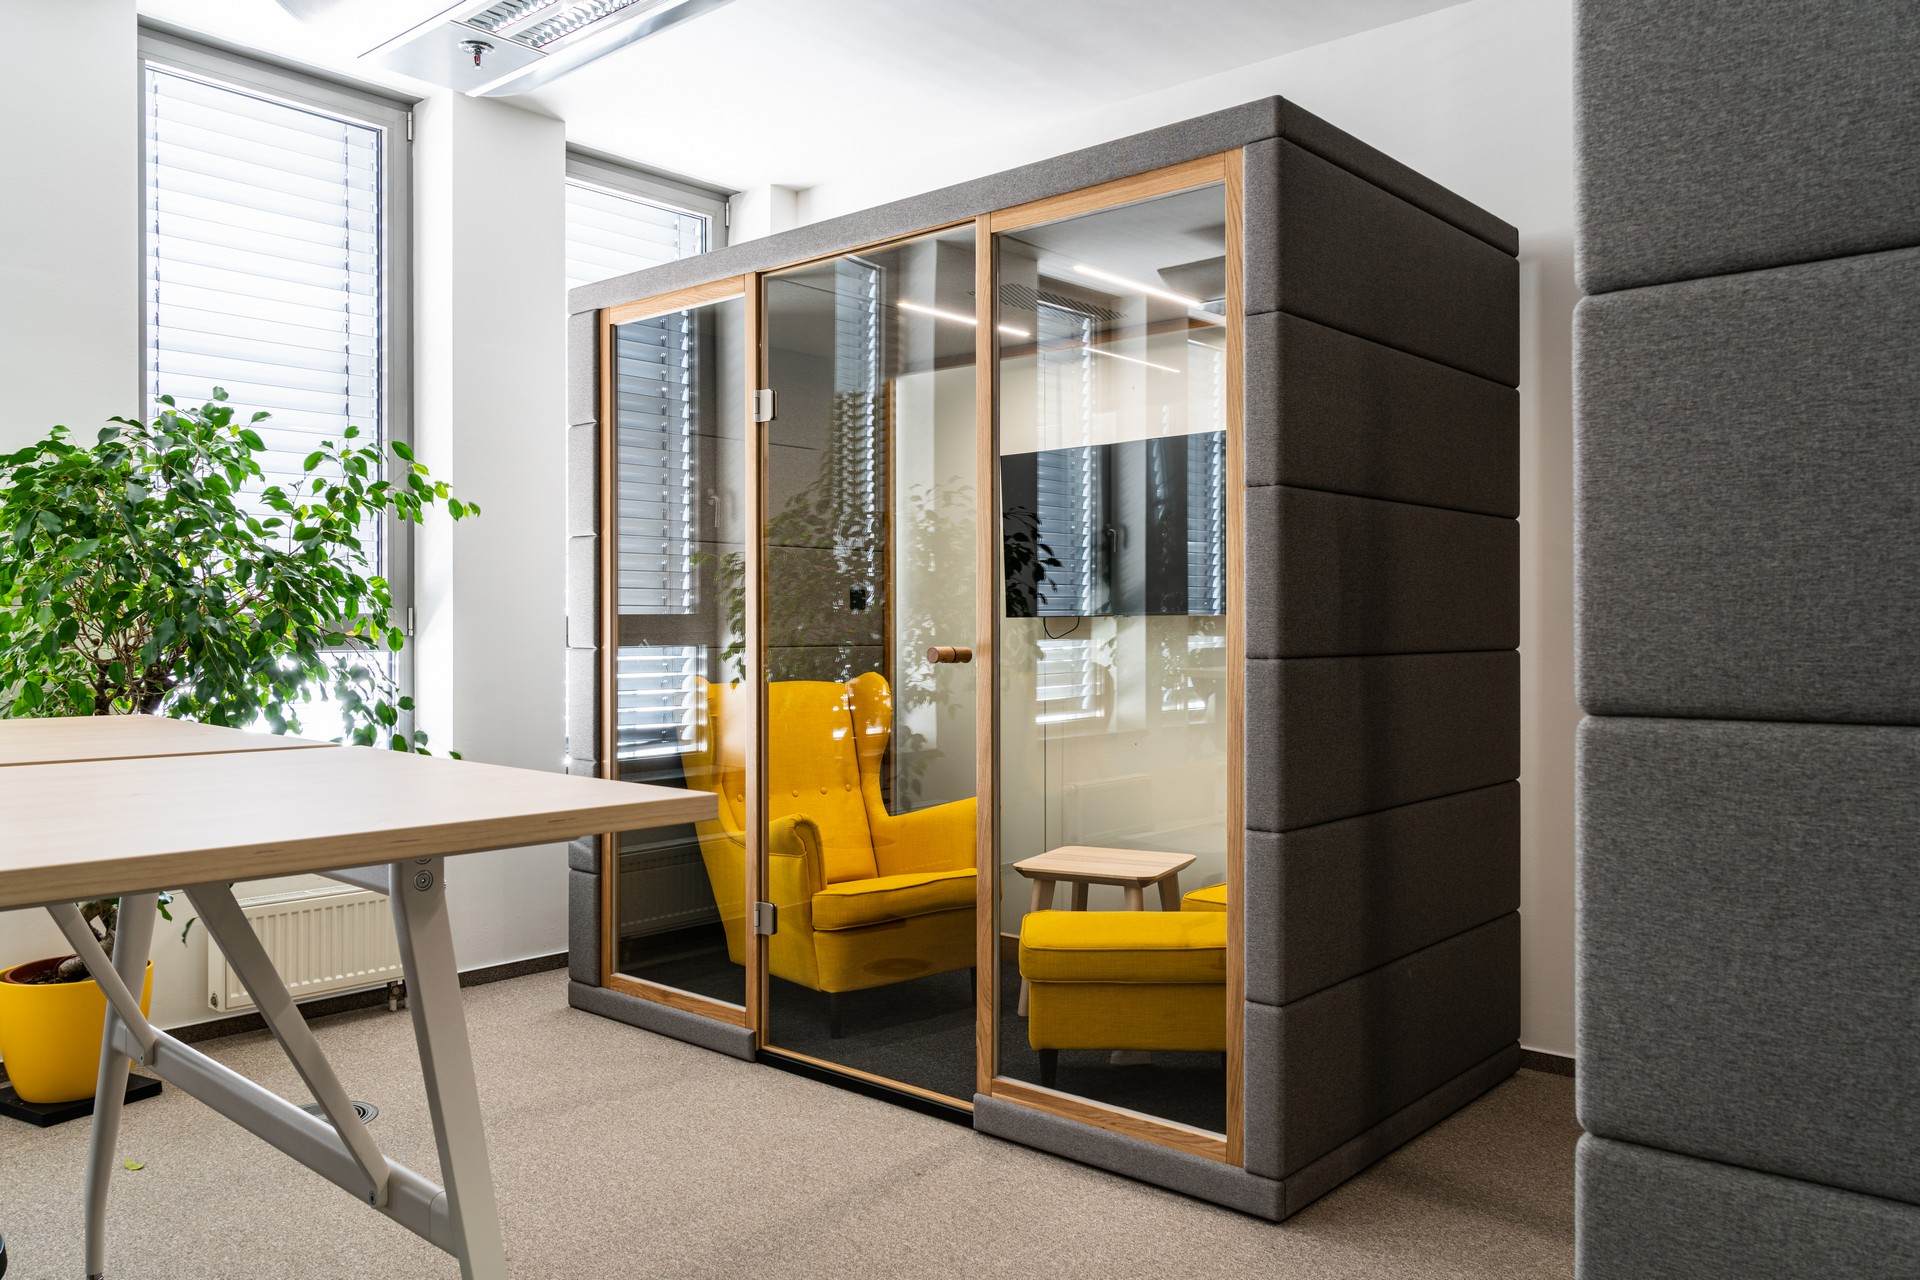 Introduction to Office Pods: Why They're Becoming Popular